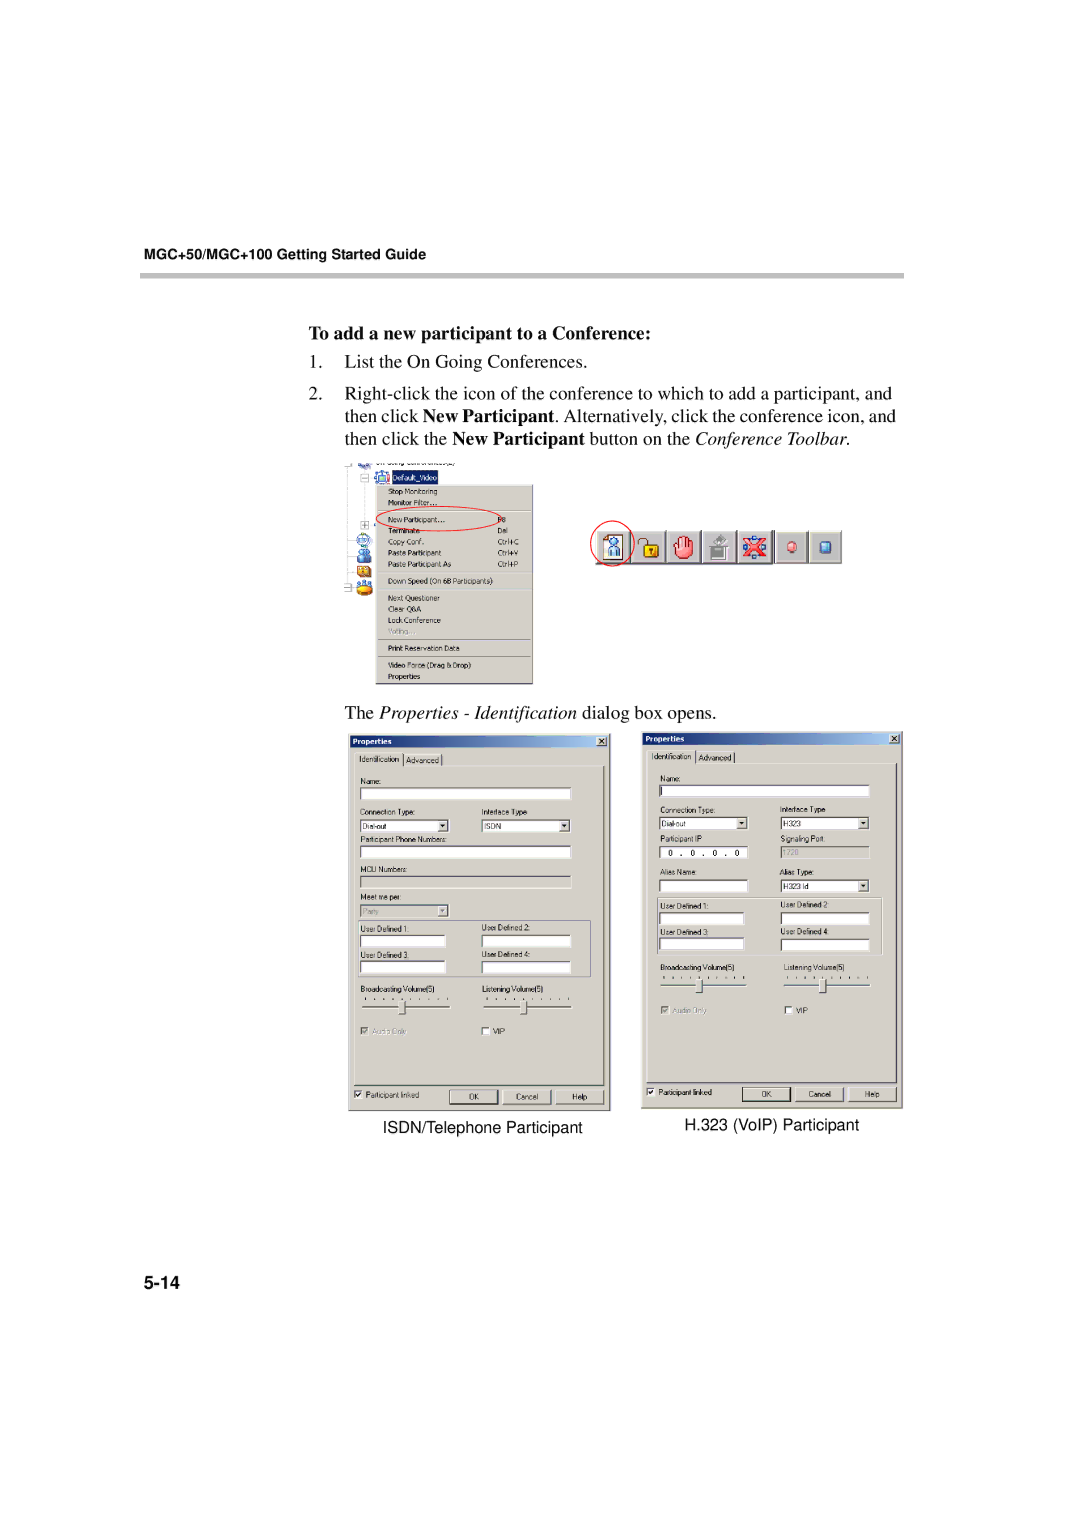 Polycom DOC2231A manual To add a new participant to a Conference, Properties Identification dialog box opens 